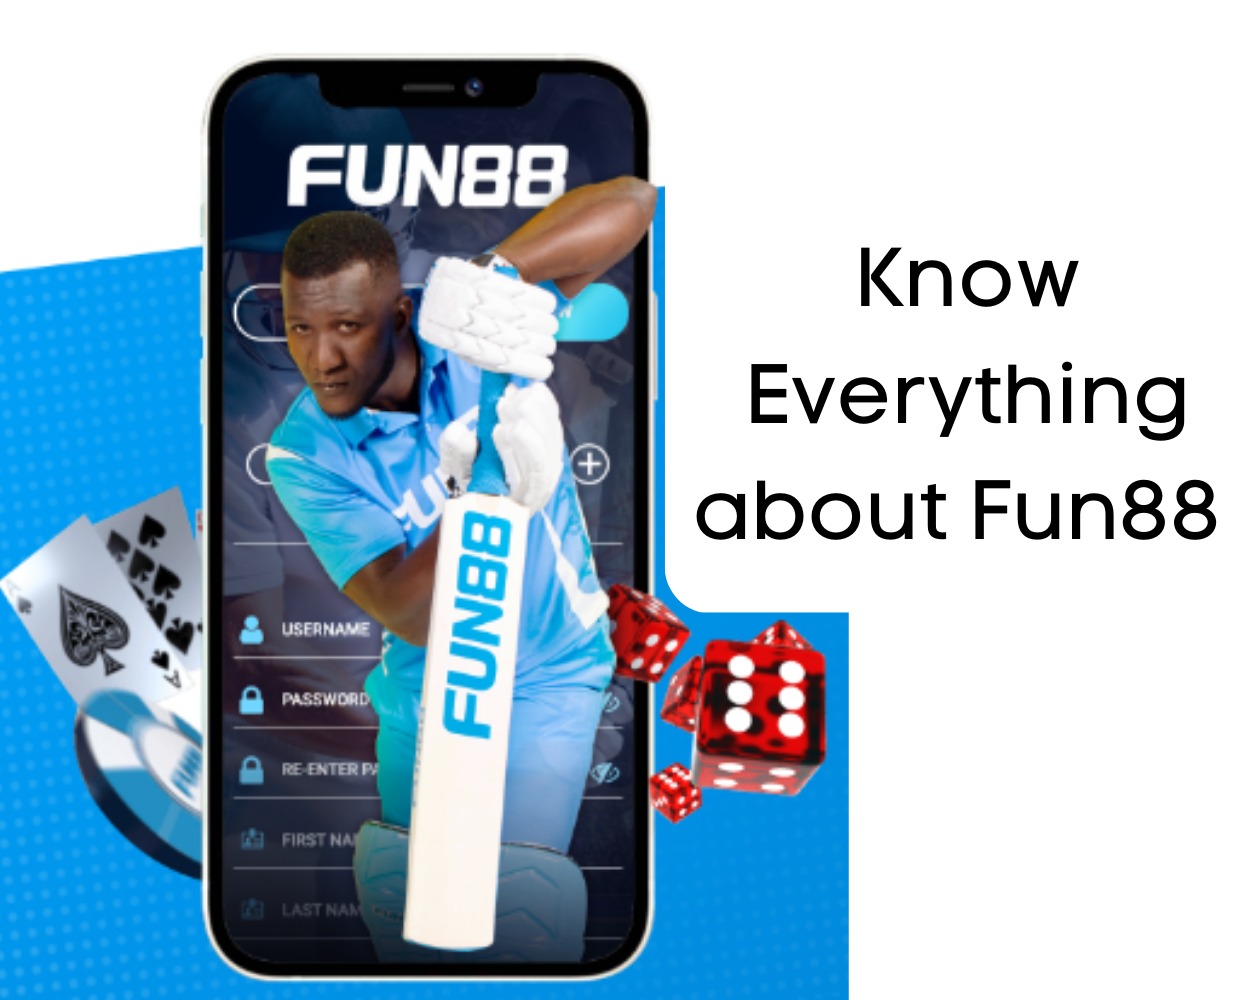 know everything about fun88